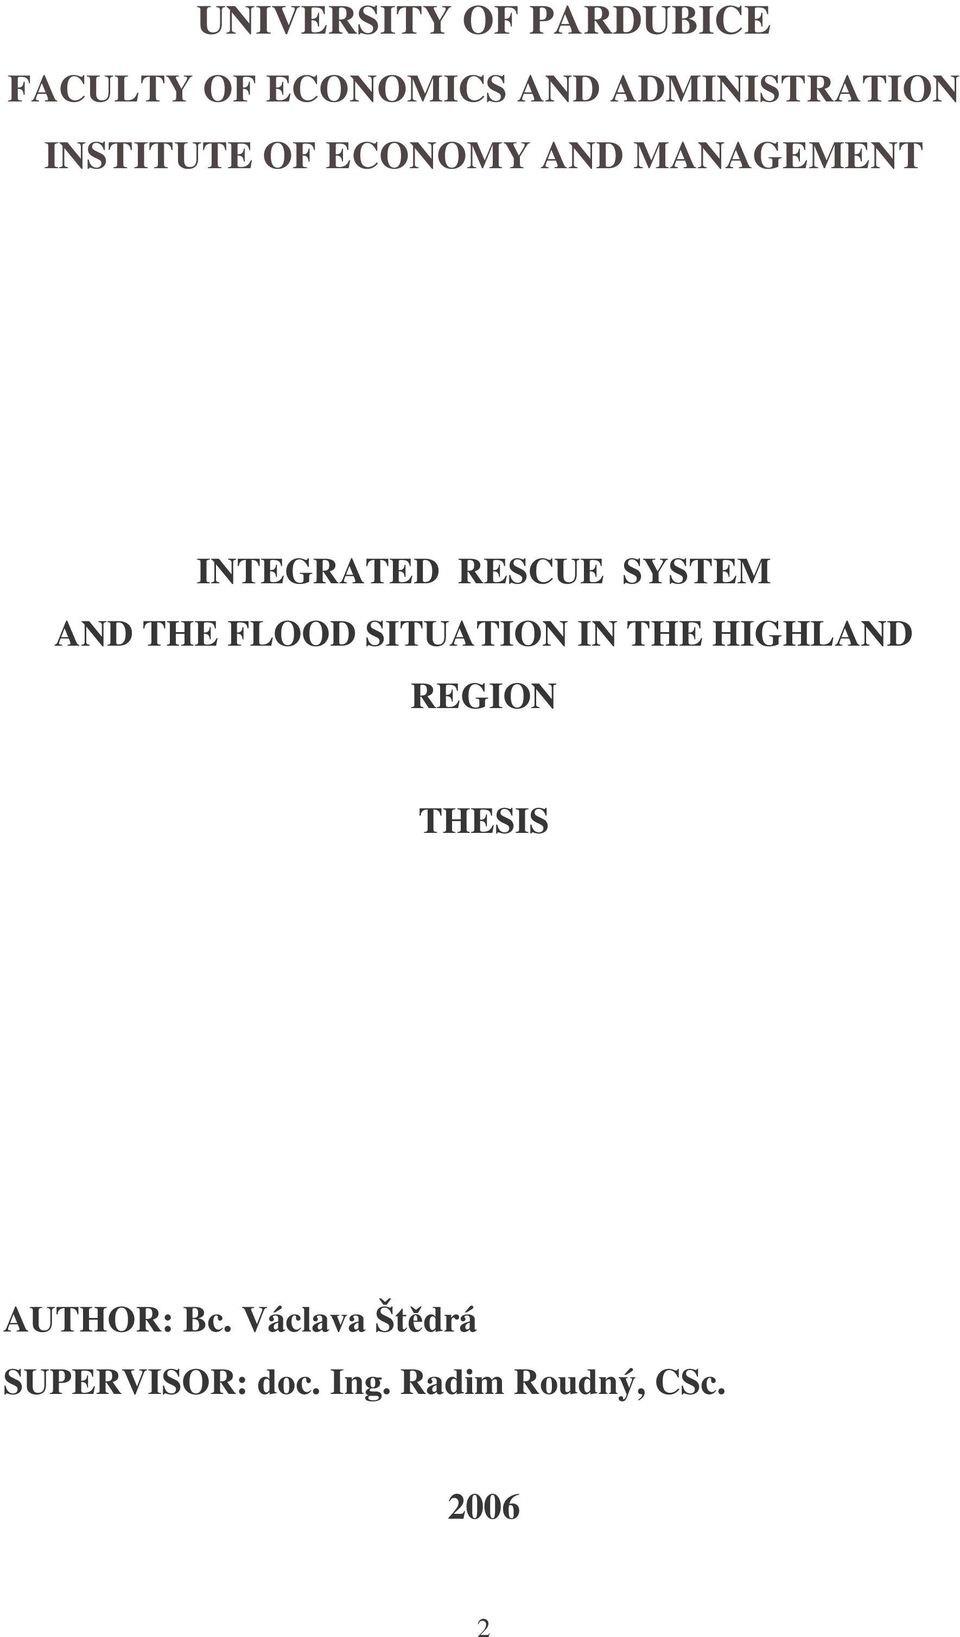 RESCUE SYSTEM AND THE FLOOD SITUATION IN THE HIGHLAND REGION